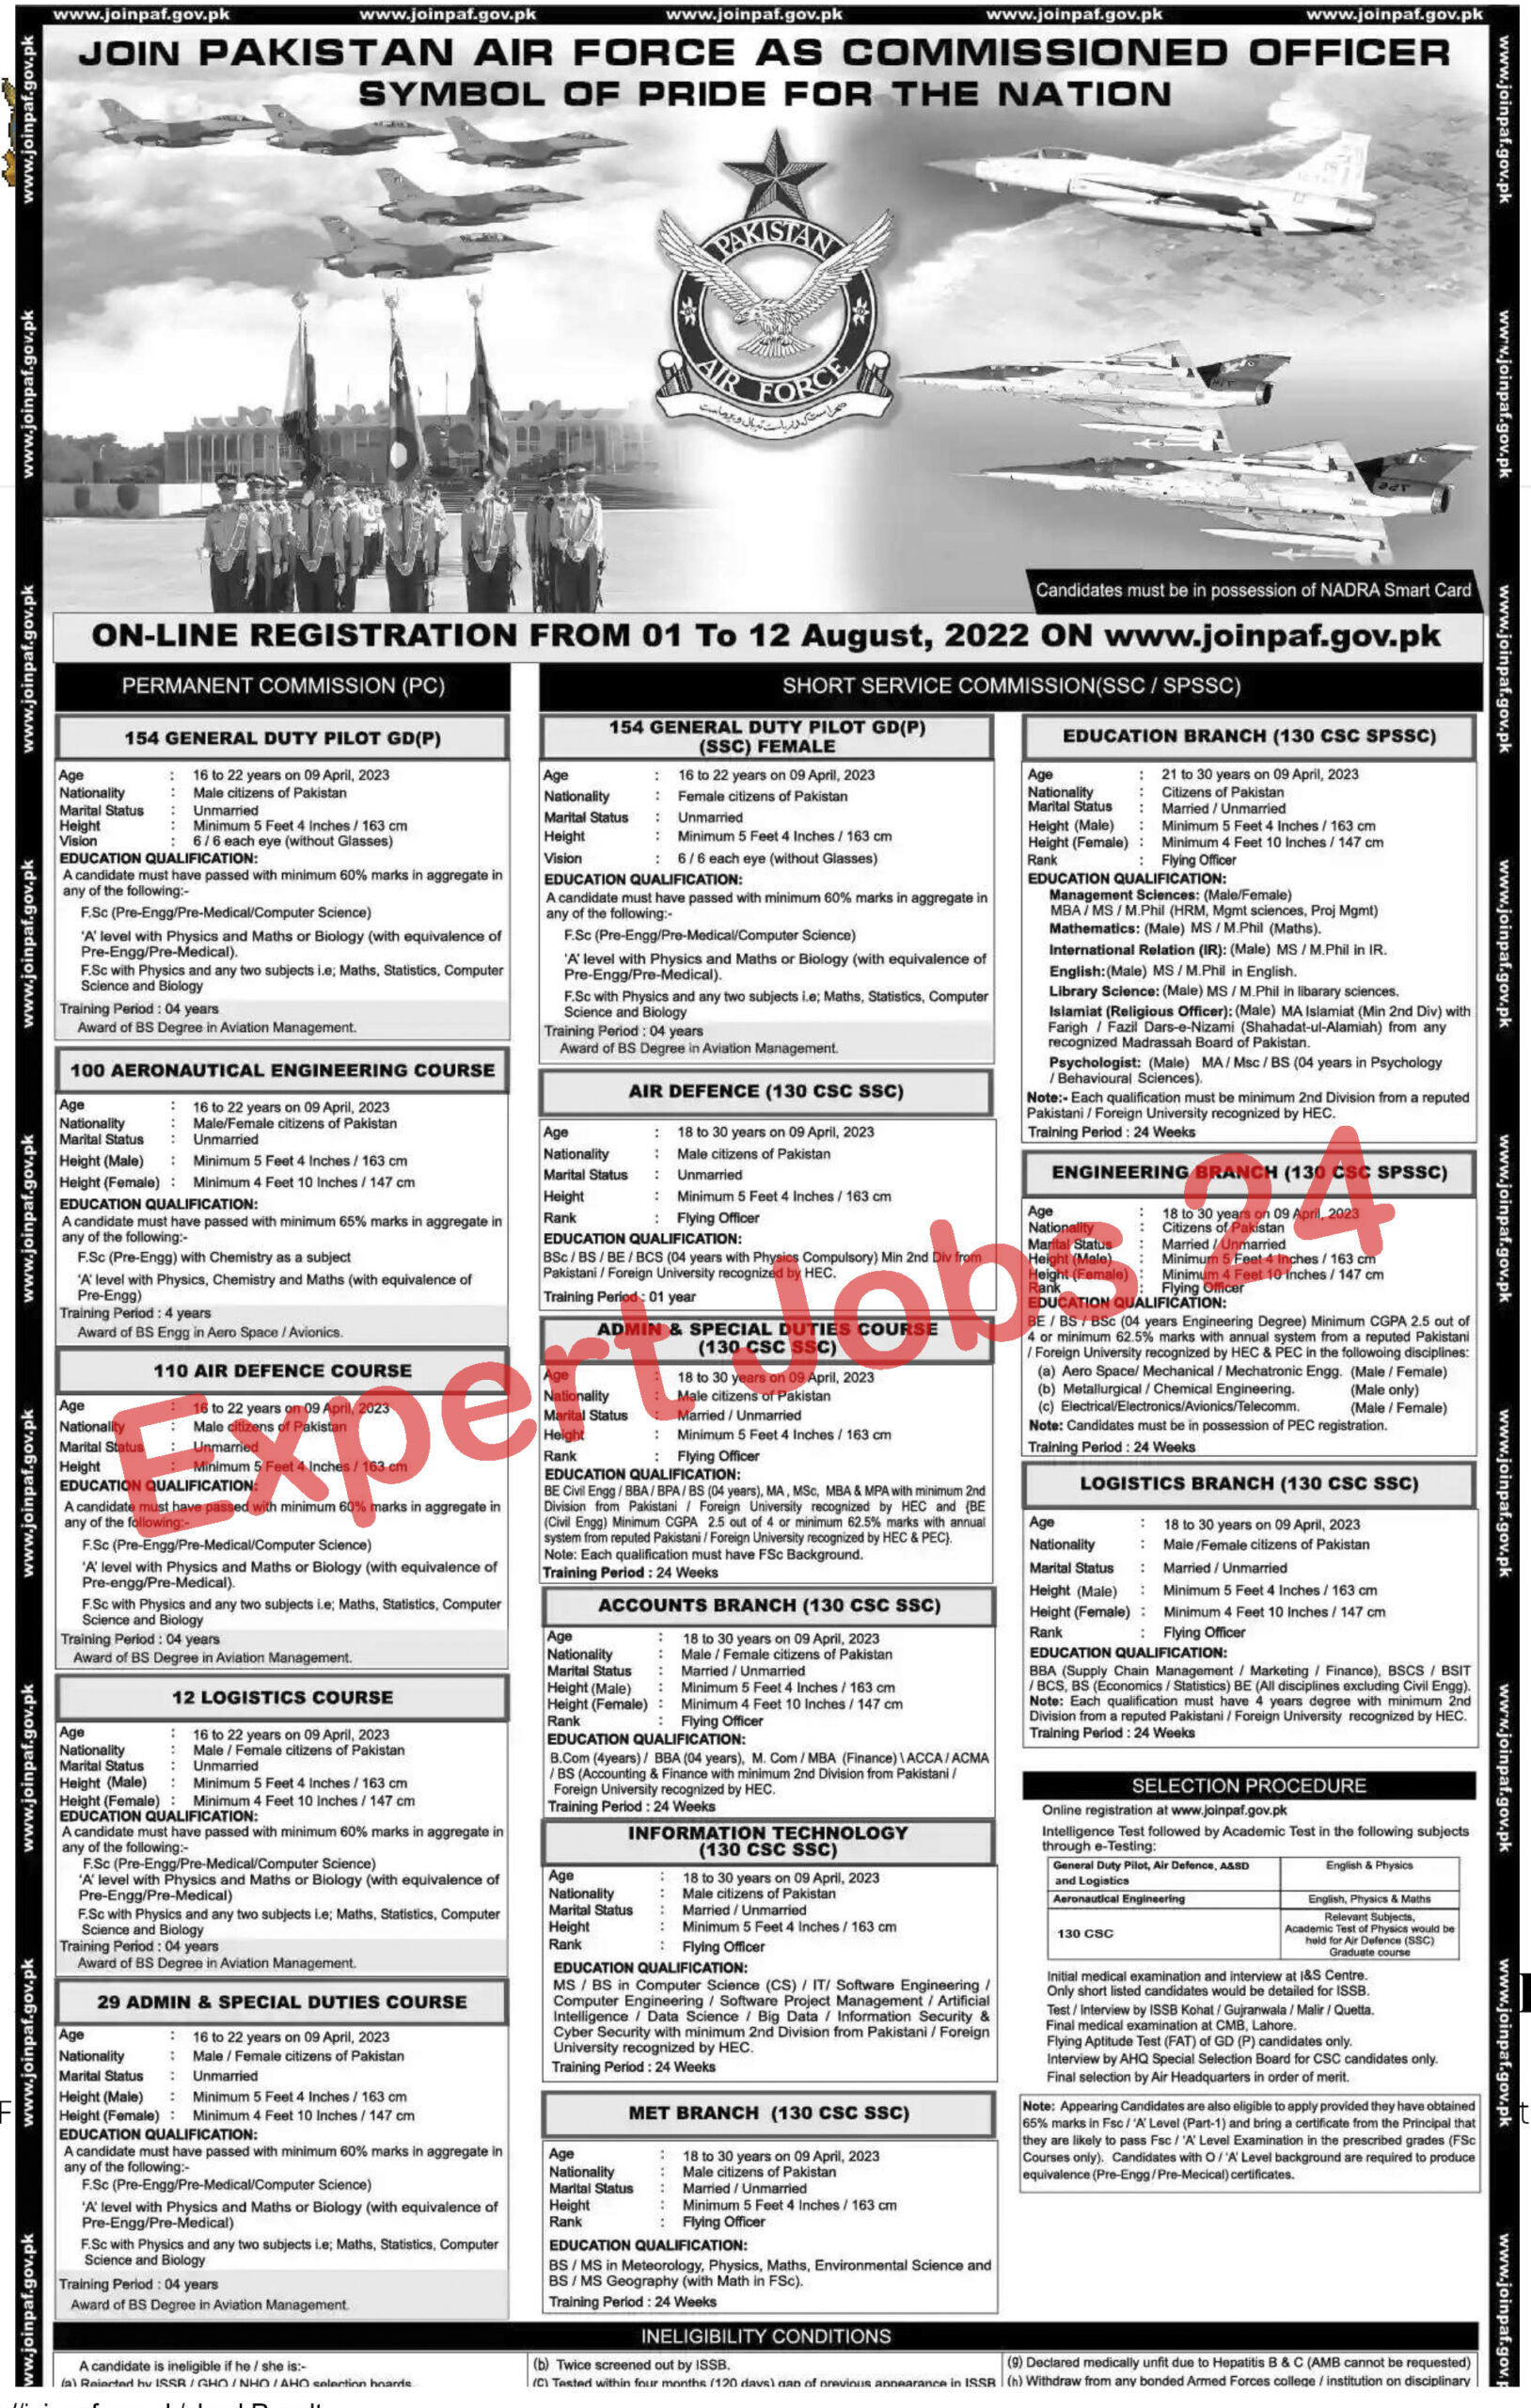 How to Apply in PAF Jobs 2022